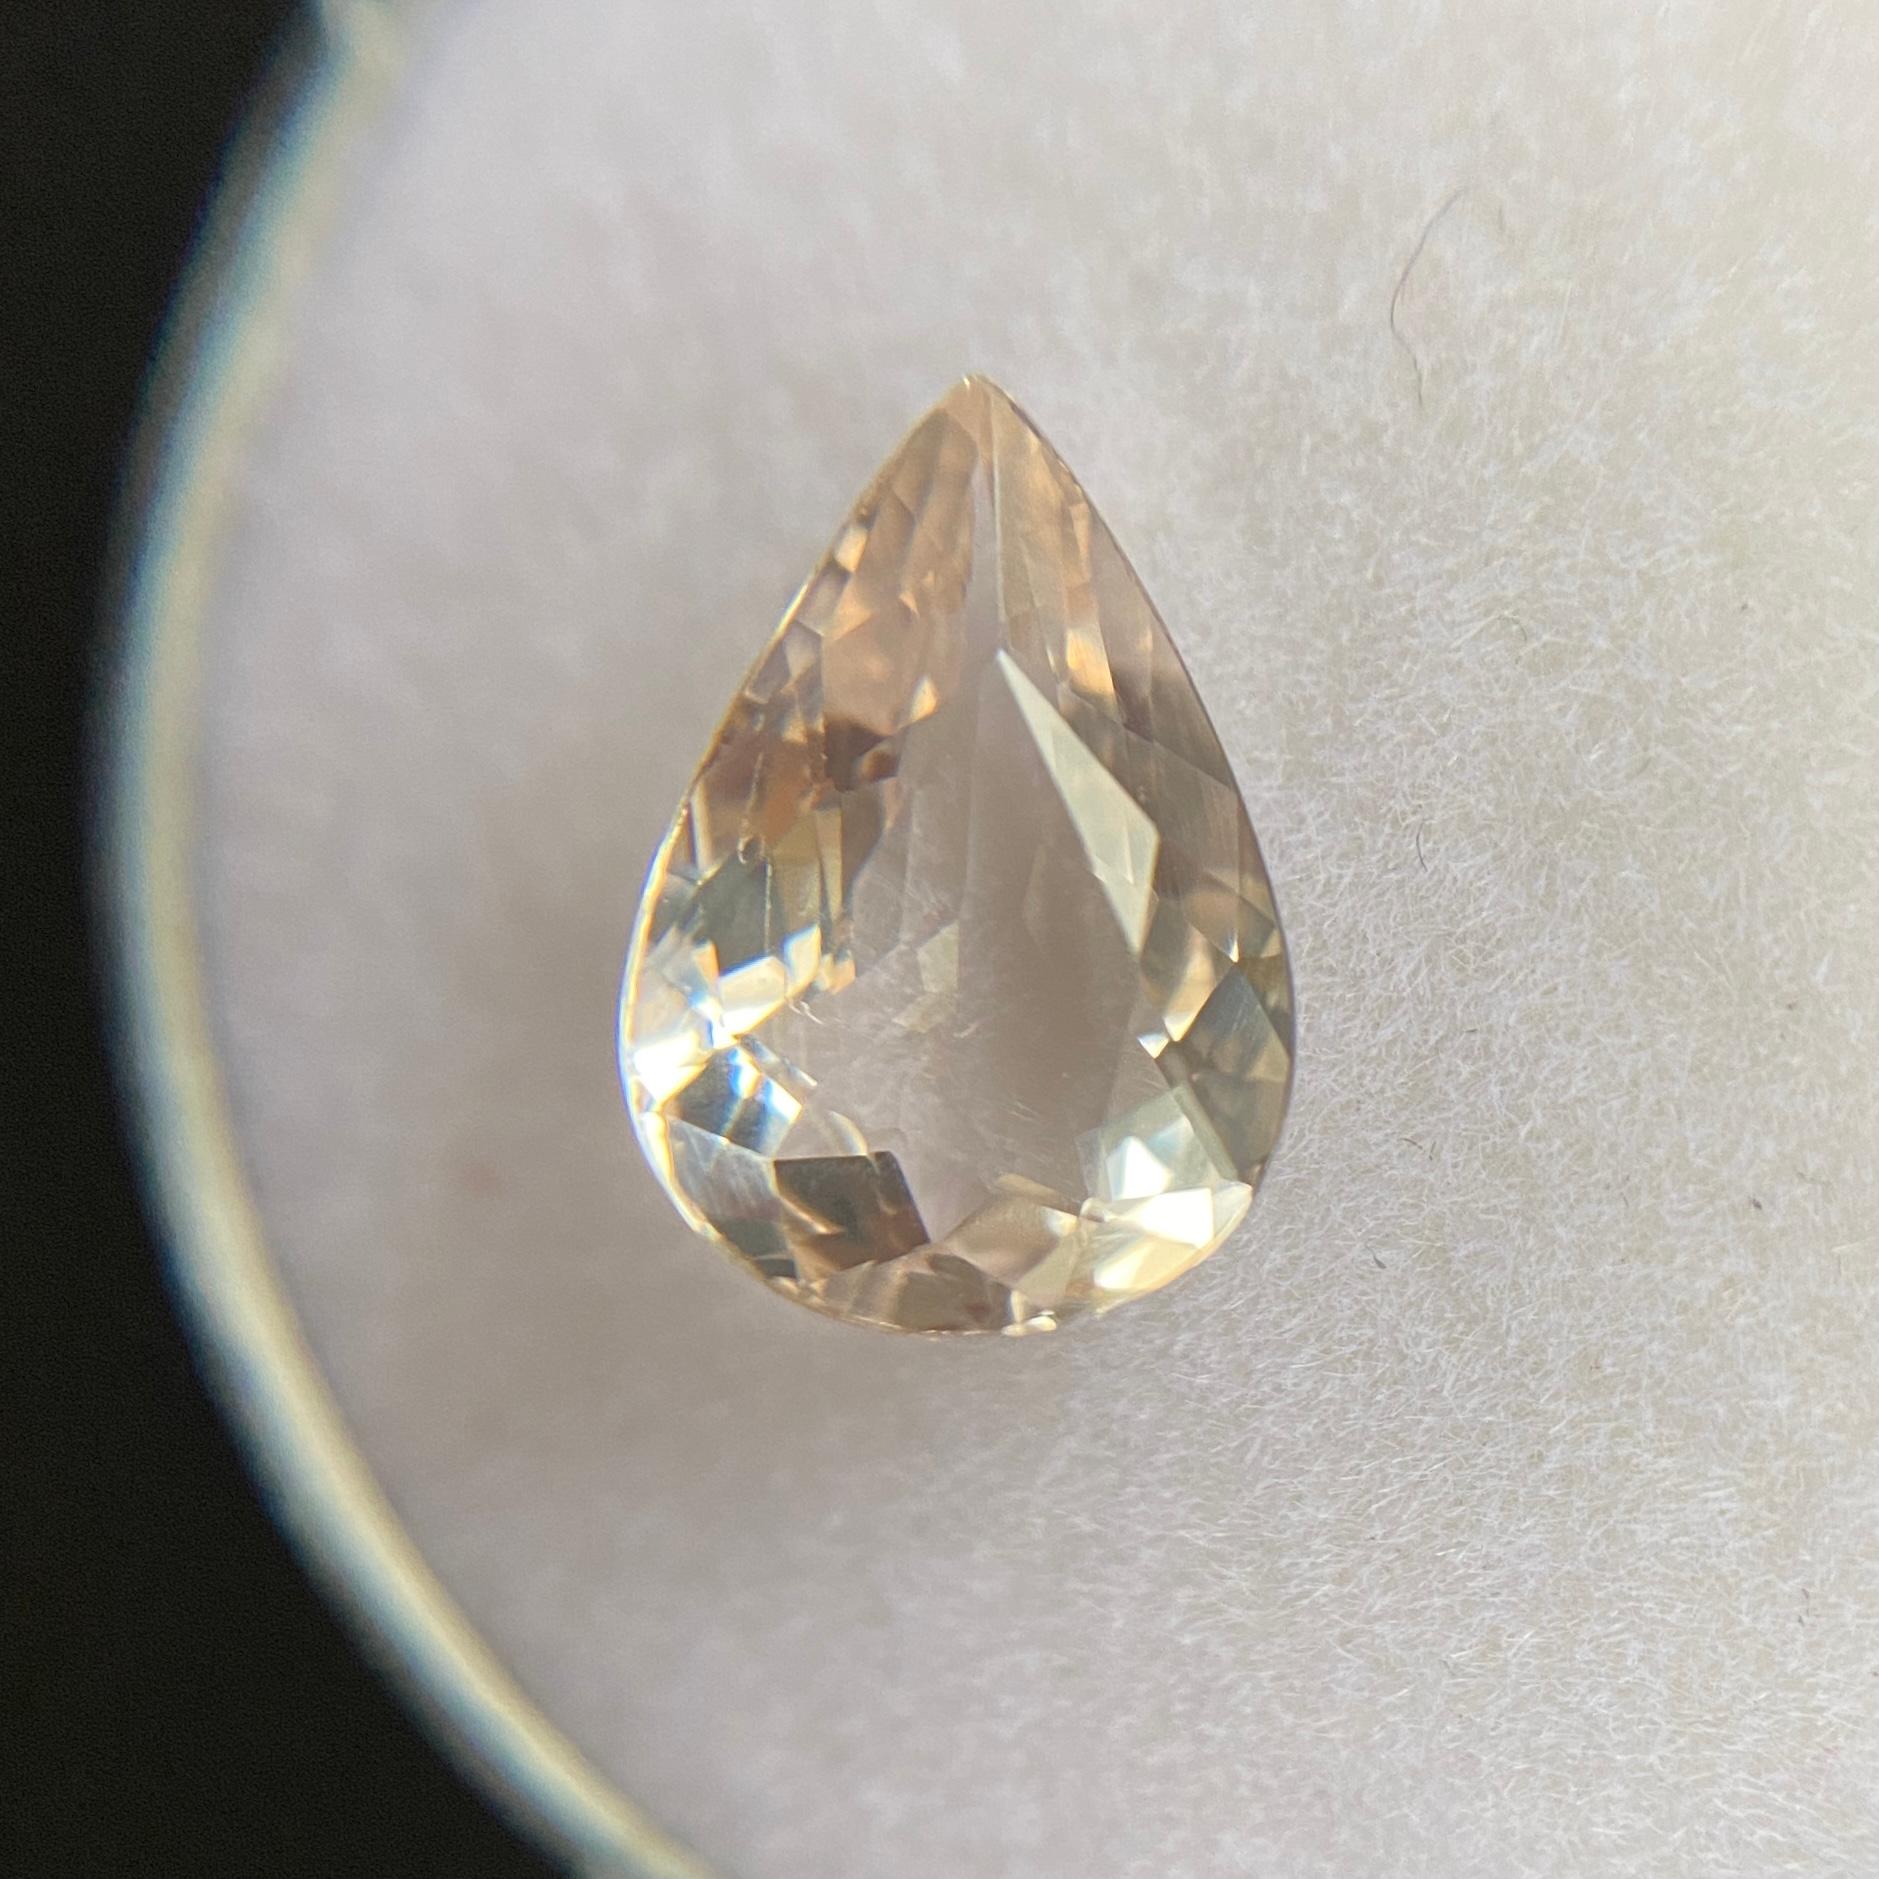 Fine Natural Morganite Gemstone.

1.45 Carat with a beautiful pink orange (peach) colour and excellent clarity. Very clean stone.

Also has an excellent pear/teardrop cut with good proportions and symmetry with an ideal polish to show great shine